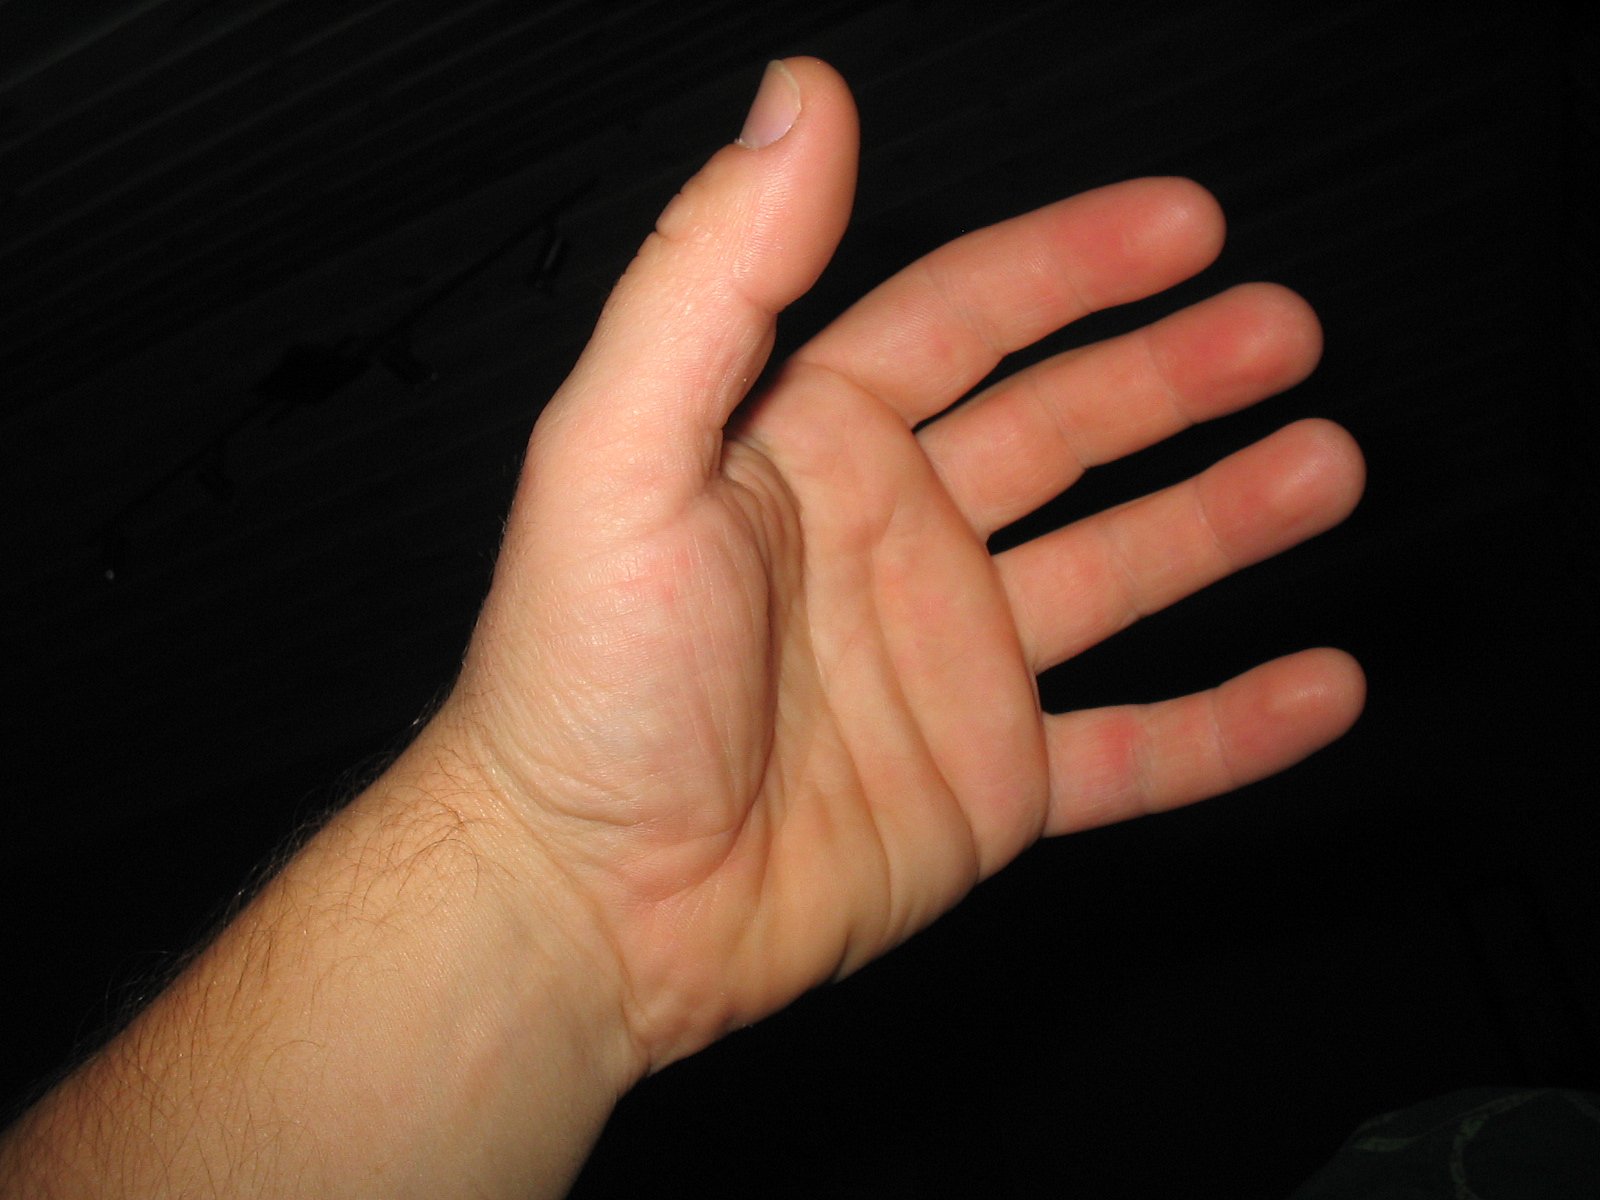 a close up of someone's hand against a black background